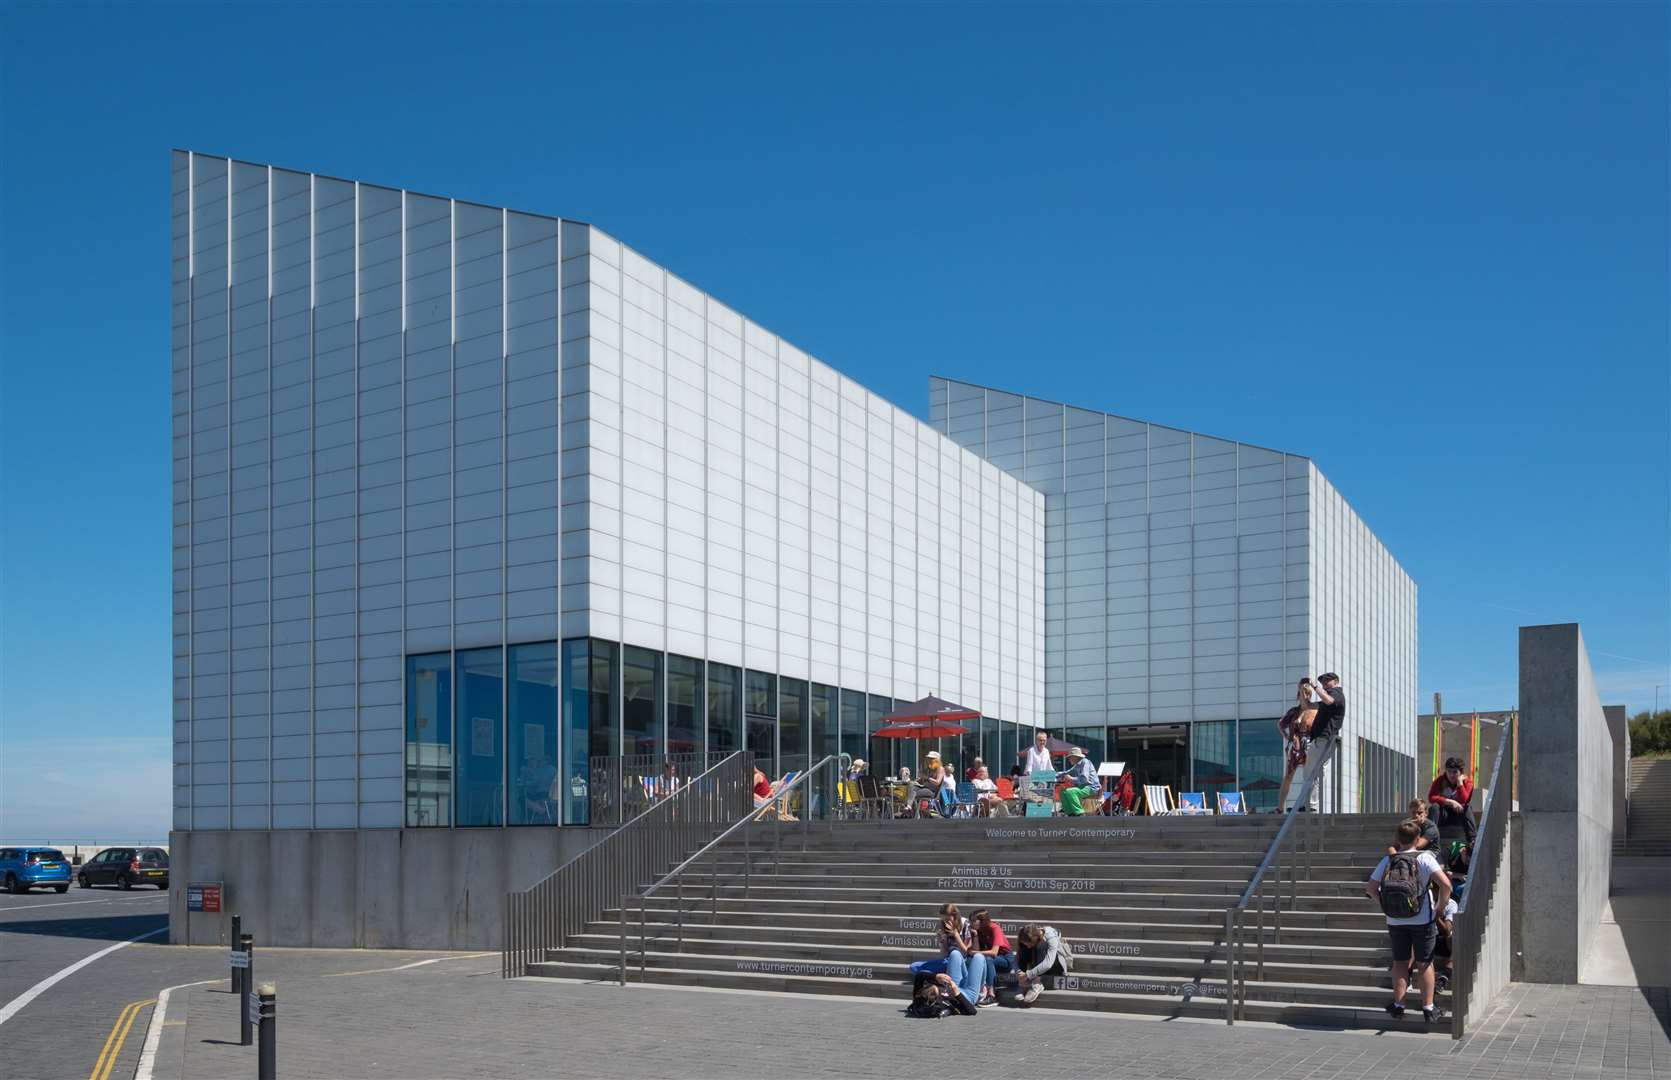 Turner Contemporary - the catalyst for Margate’s regeneration